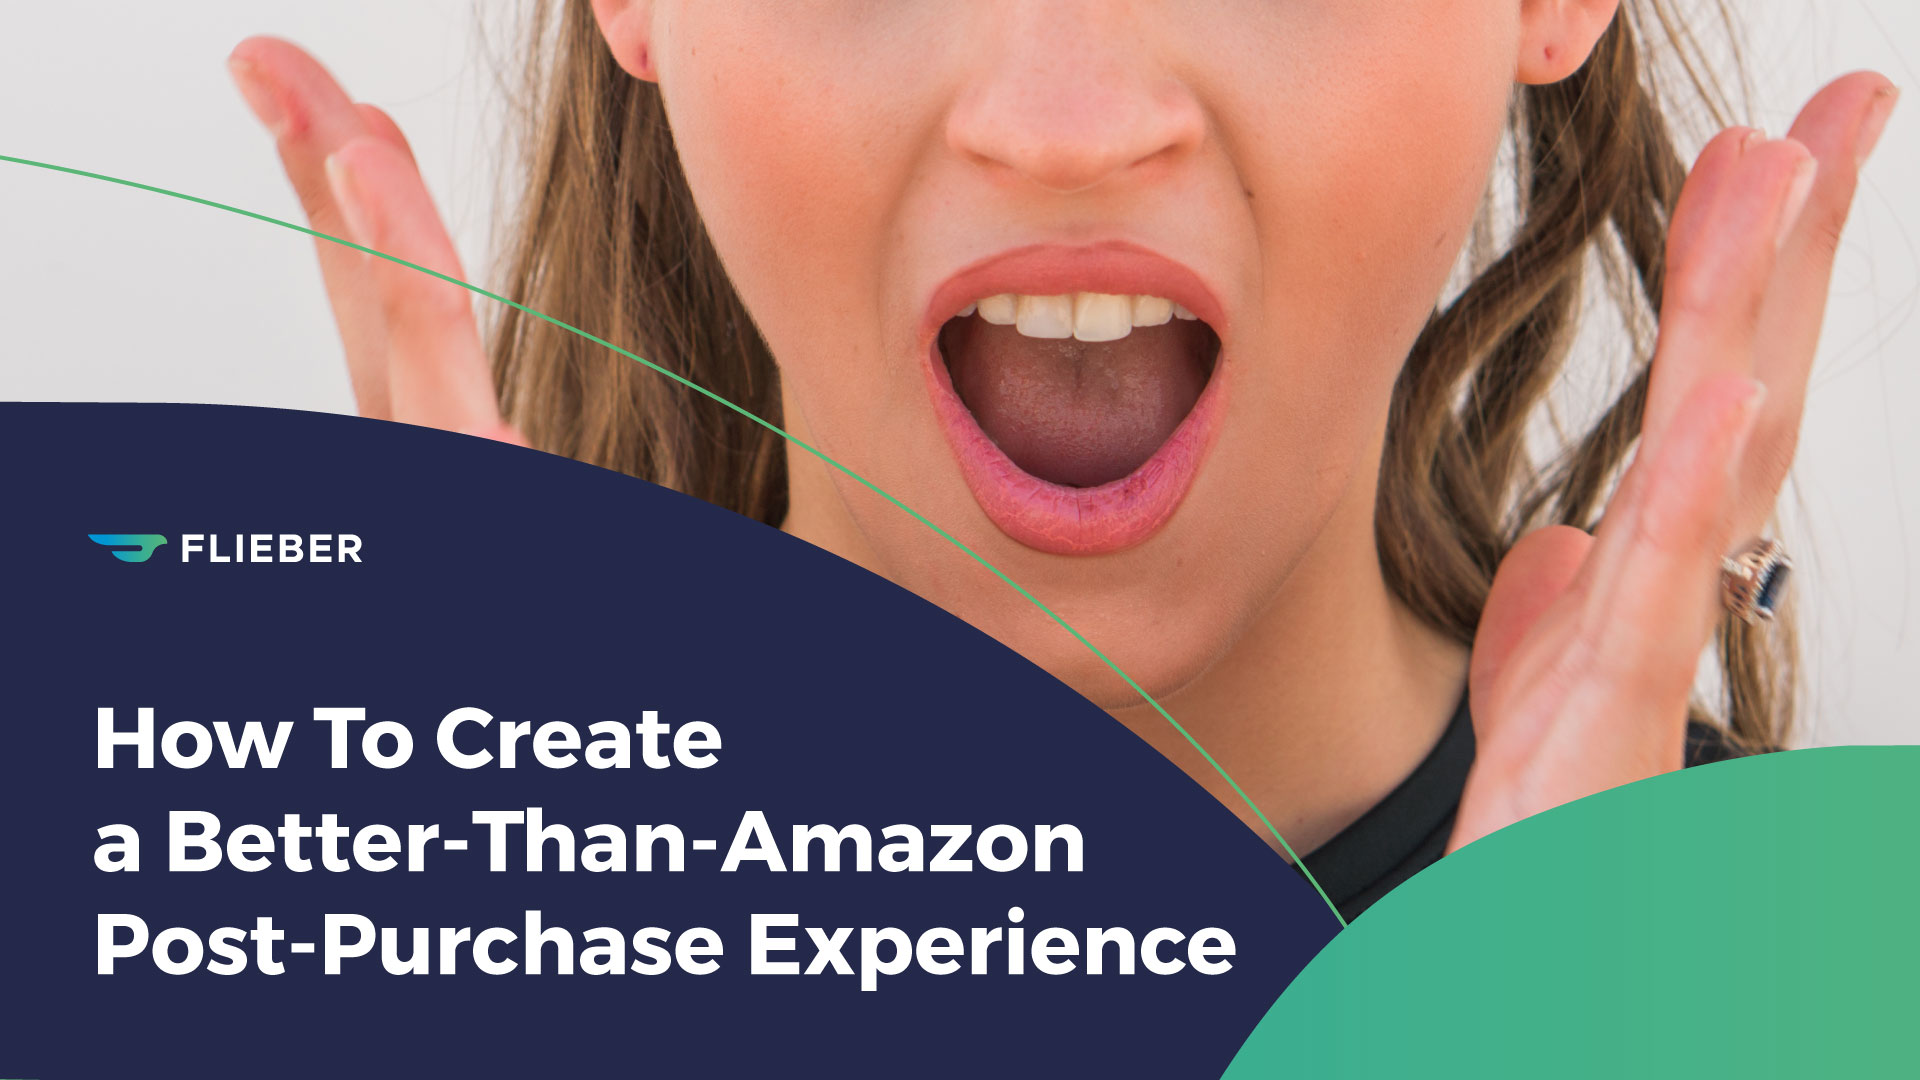 How to create a better-than-amazon post-purchase experience